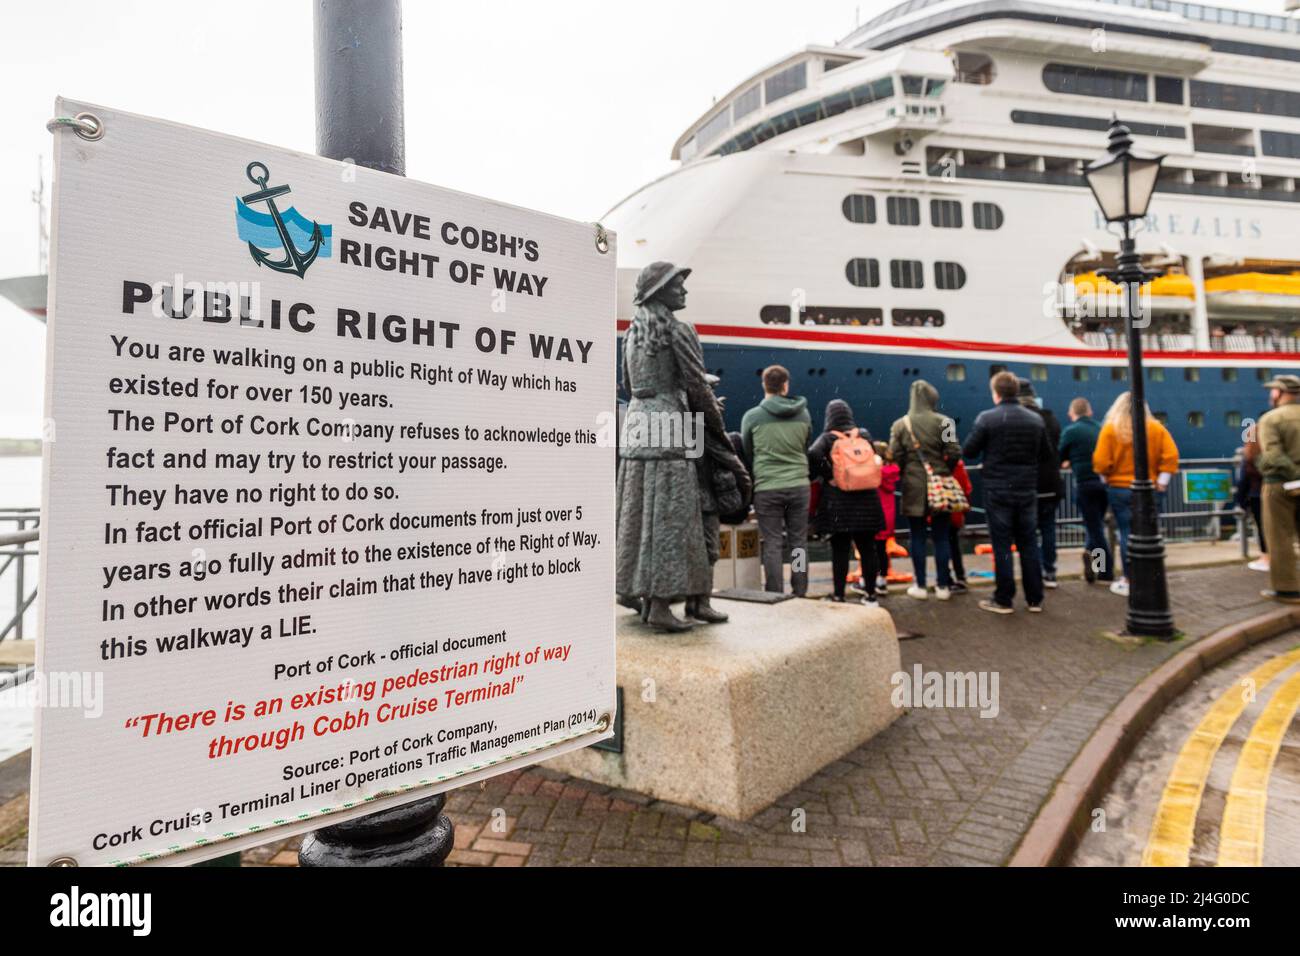 Cobh, Co. Cork, Ireland. 15th Apr, 2022. The first cruise ship to visit the Port of Cork in 3 years, 'Borealis' arrives at Cobh Cruise Terminal this morning. The 'Save Cobh Right of Way' protest group held a small protest against the Port of Cork's closure of the public right of way when cruise ships moor. Credit: AG News/Alamy Live News Stock Photo